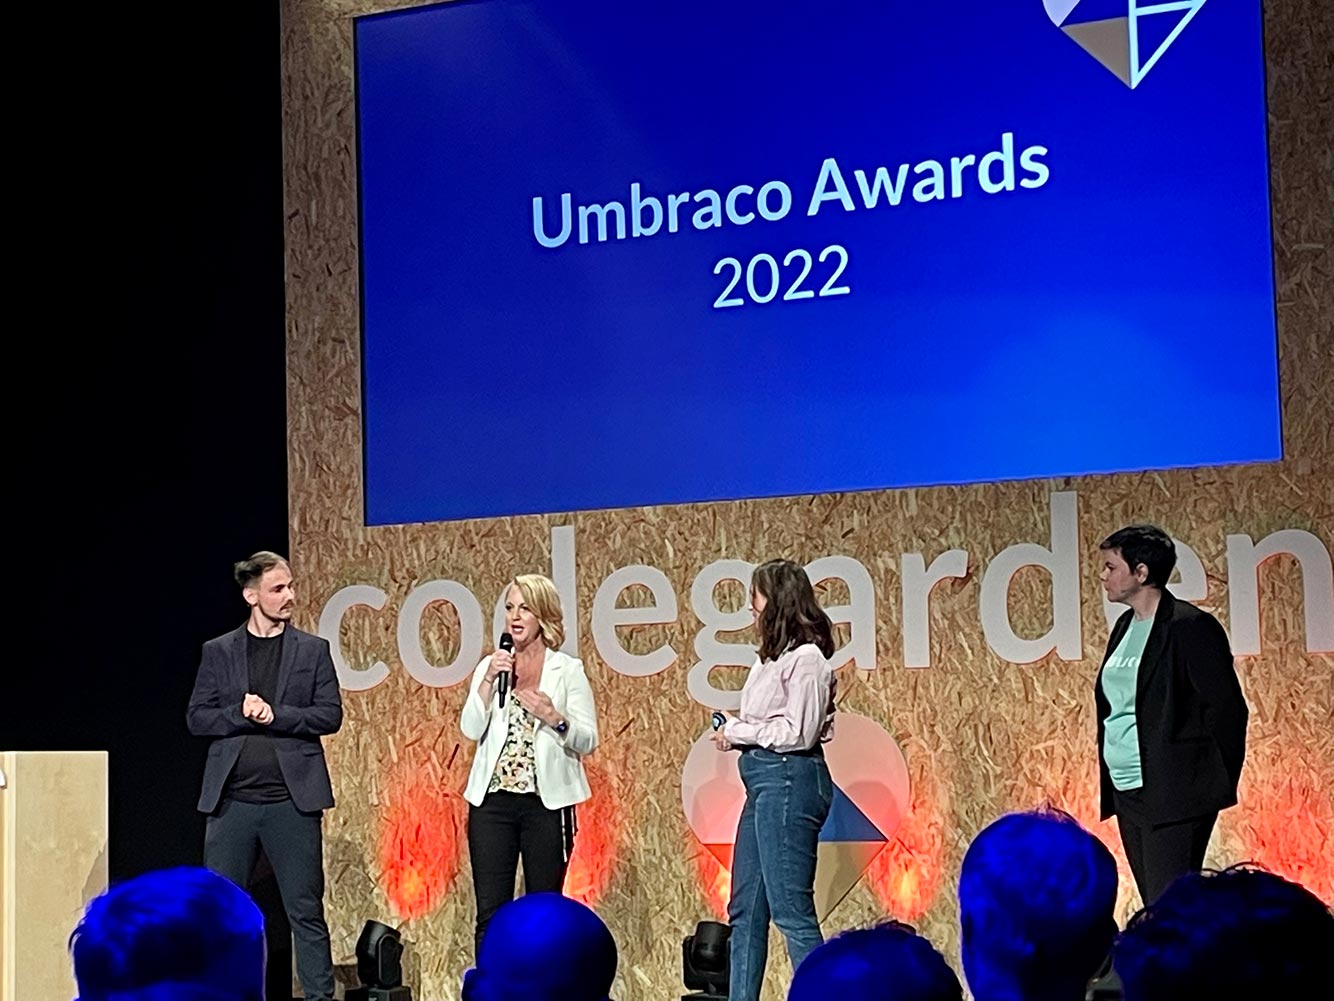 Karla on stage during the Umbraco Awards ceremony.